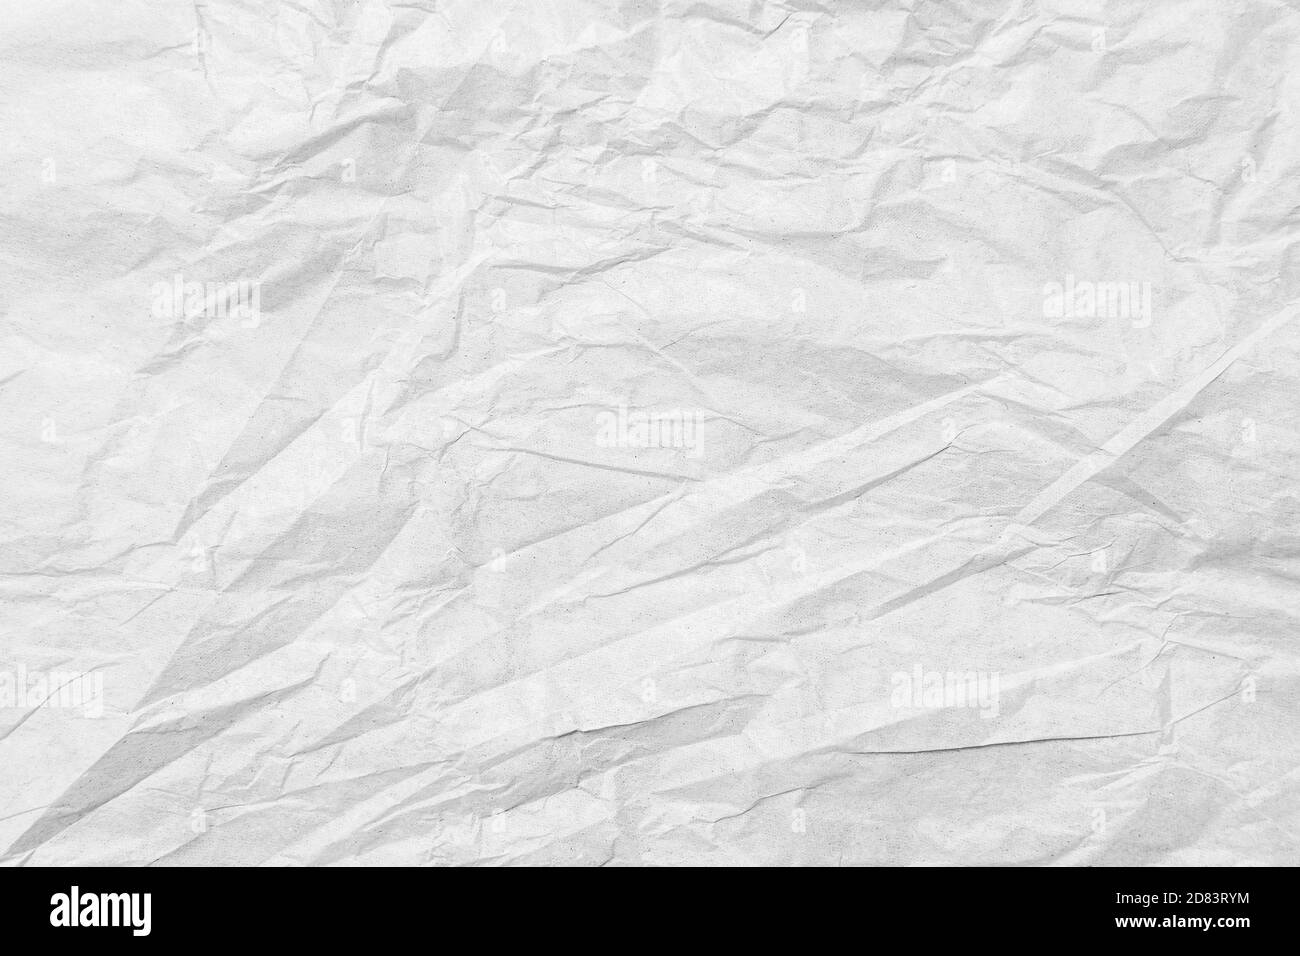 White Crumpled Paper Texture Background And Free Space Stock Photo Alamy